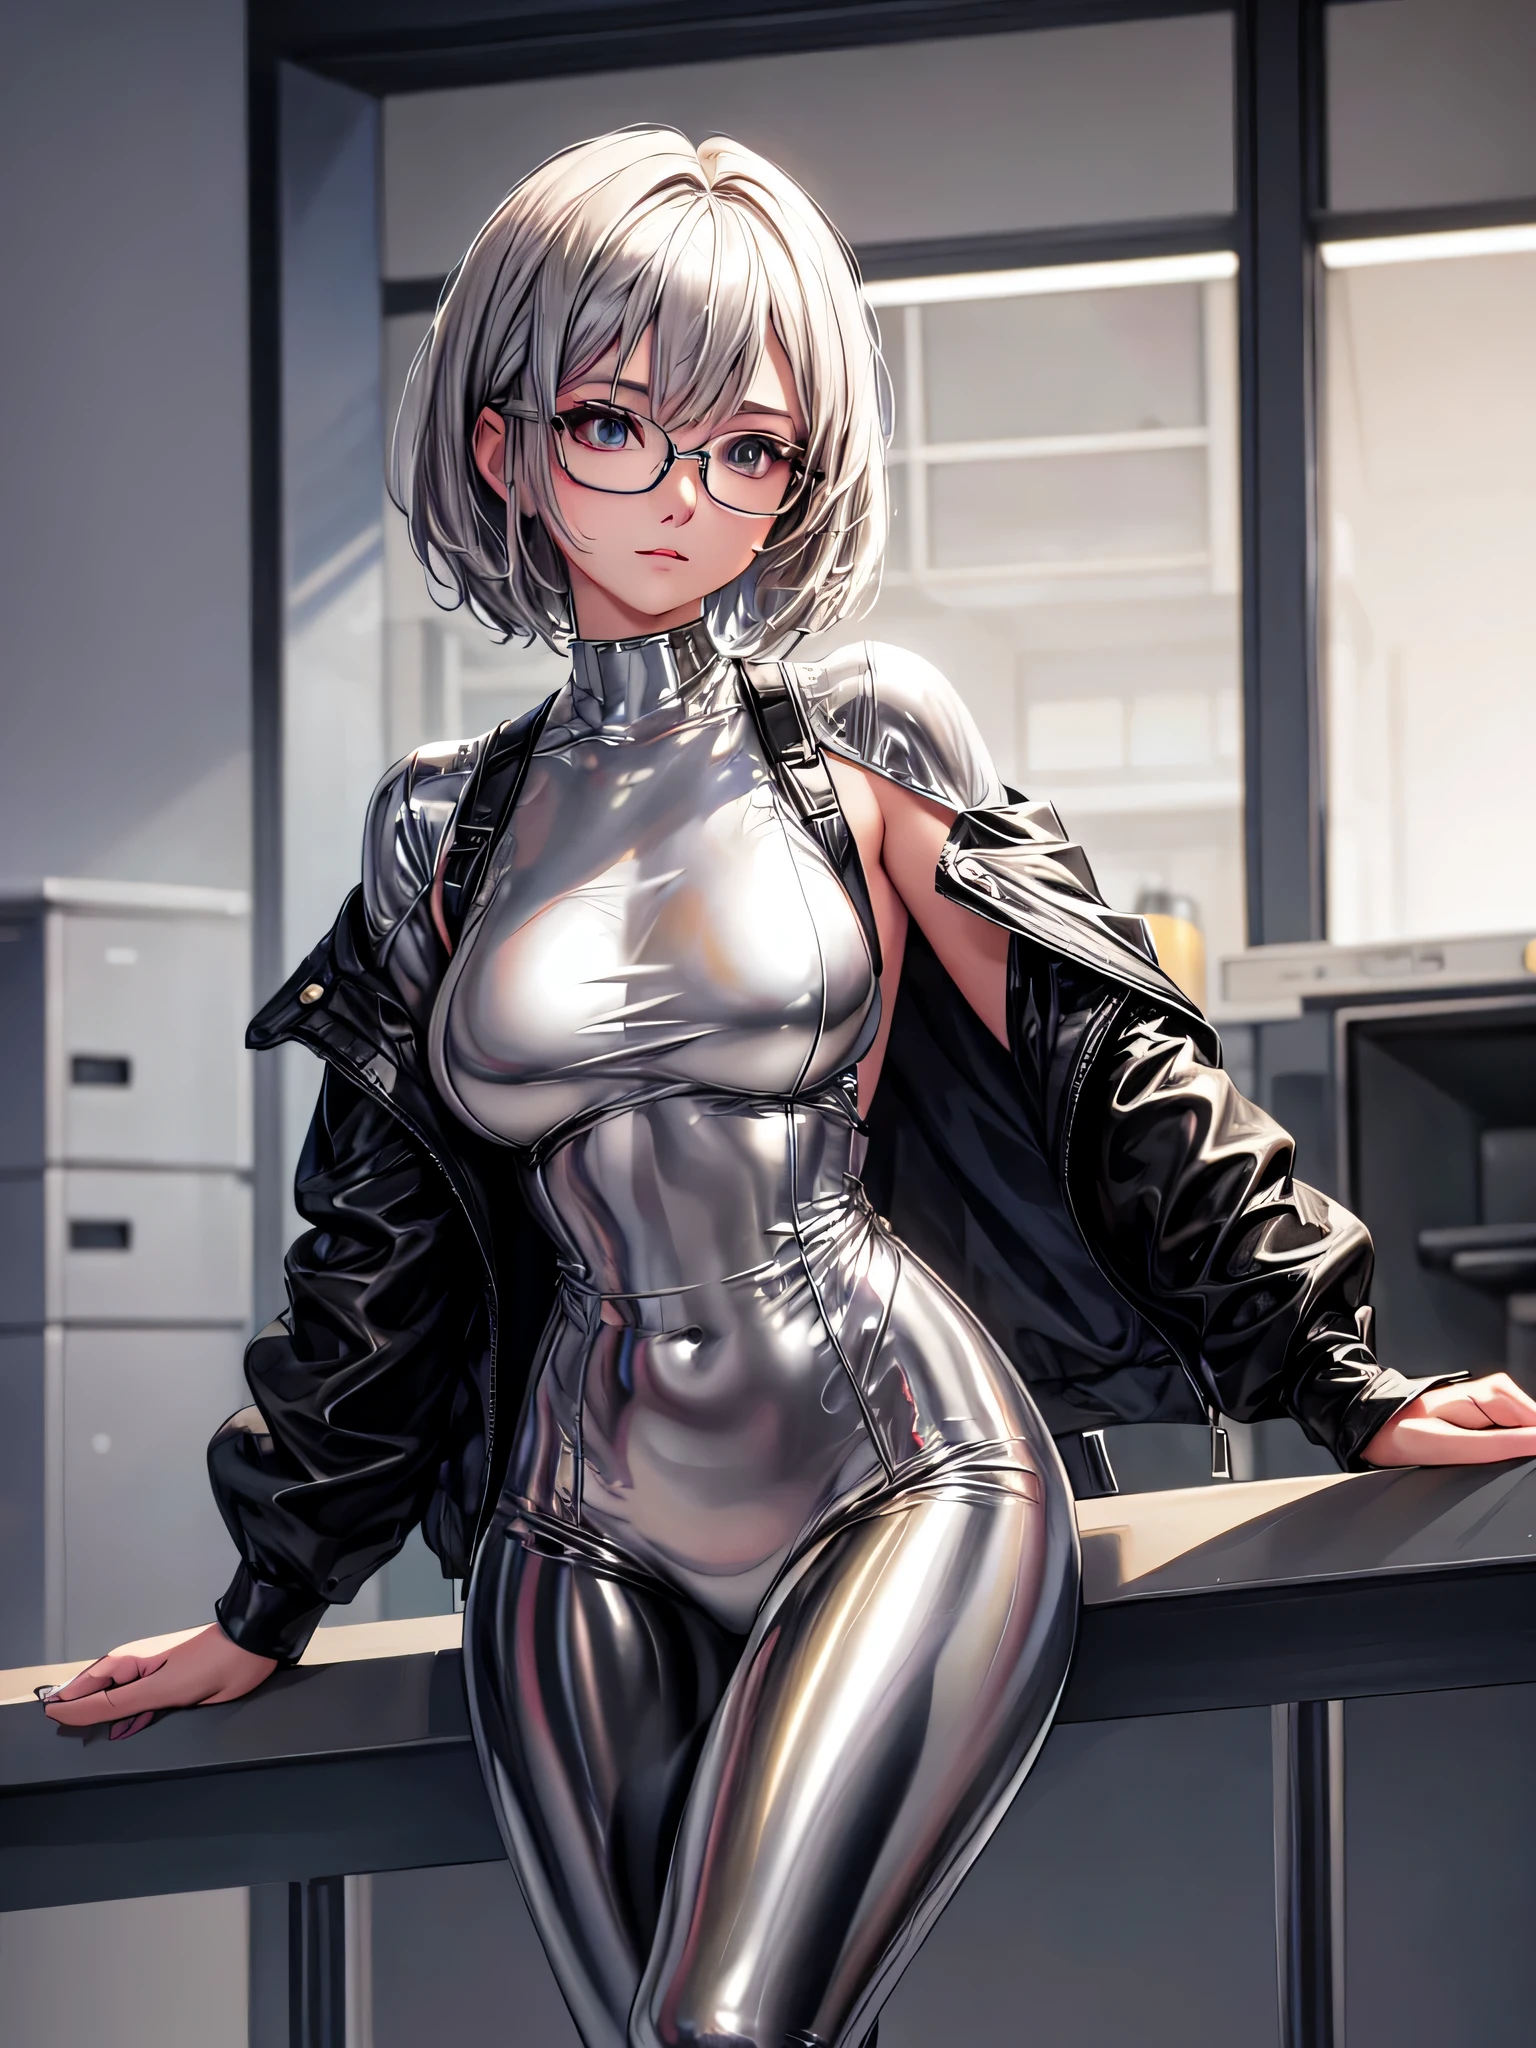 Top quality 8K UHD、Beautiful woman with short hair and silver hair wearing glasses and a silver metallic bodysuit、Beautiful woman wearing shiny silver tights and glasses